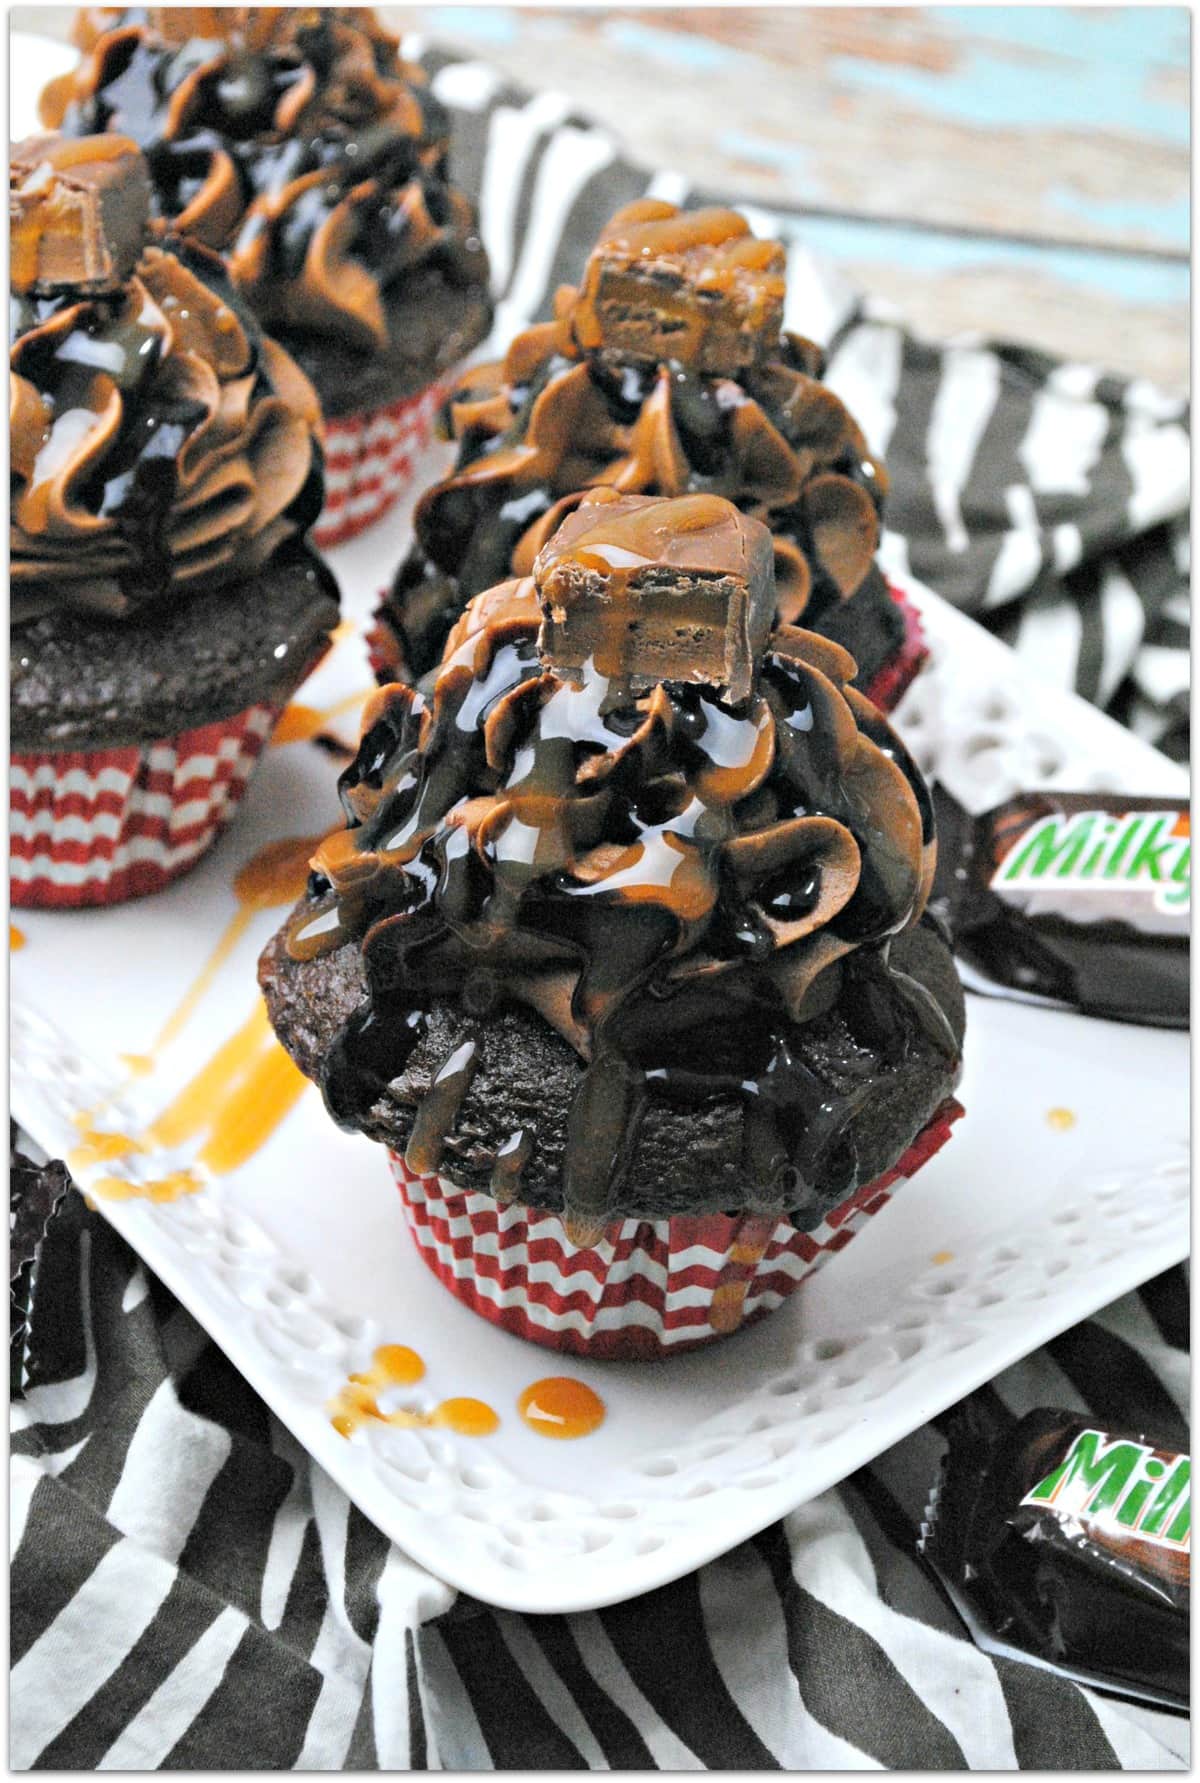 Have you ever had a Milky Way cupcake? Everyone loves a Milky Way candy bar. Can you imagine how delicious a Milky Way cupcake would be? Pure Heaven.